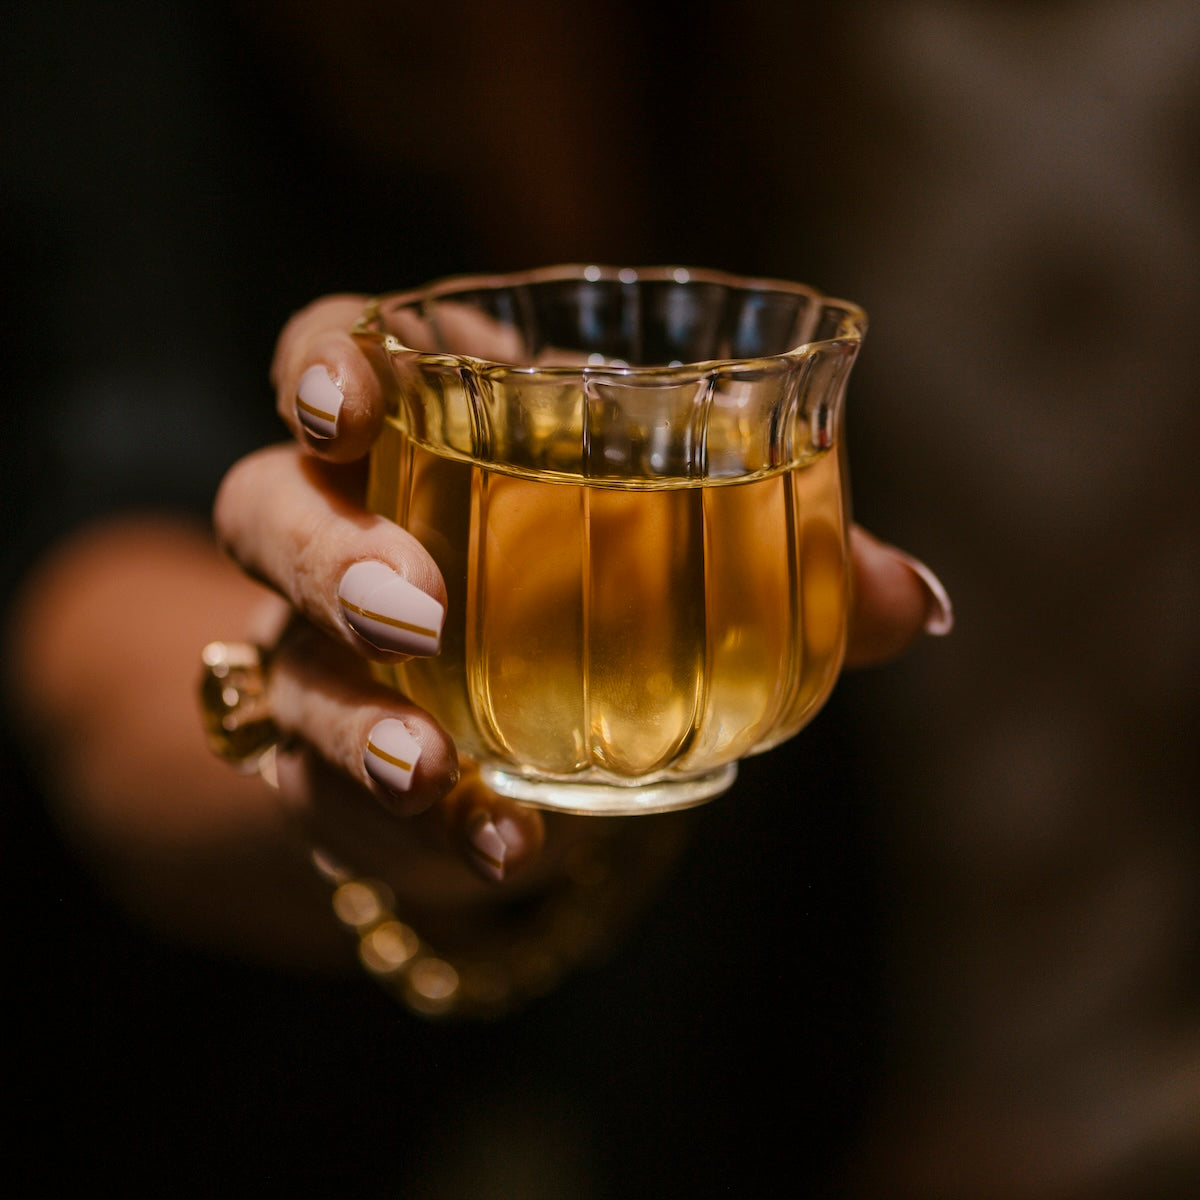 A hand with beige manicure and a gold ring holds an intricately designed, translucent glass filled with a golden liquid, possibly April 2024 Harvest - Grand Cru First Flush Goomtee Estate Darjeeling FTGFOP1. The background is dark, making the glass and exquisite tea from Magic Hour the focal point of the image.